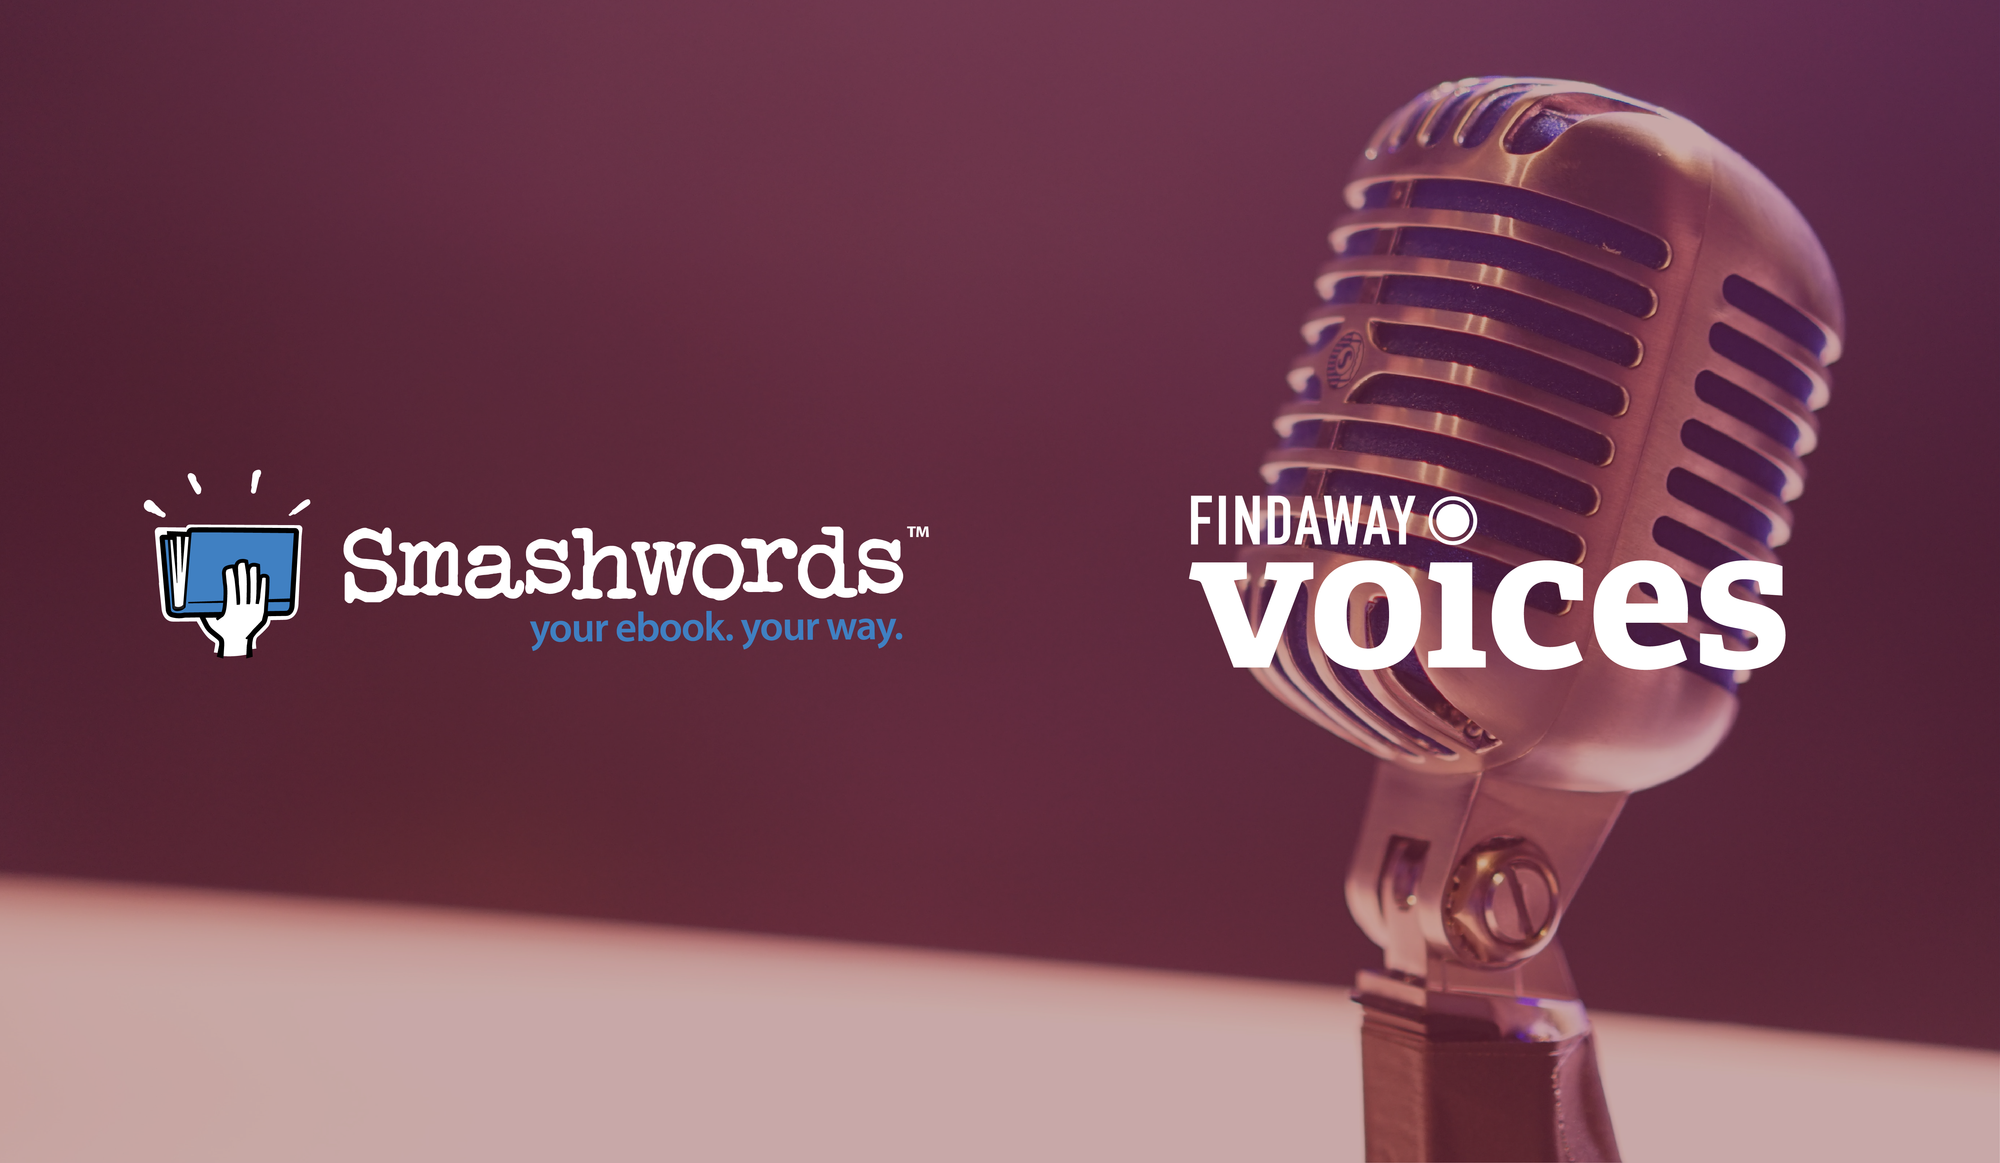 Audiobook production just became even easier for Smashwords users.